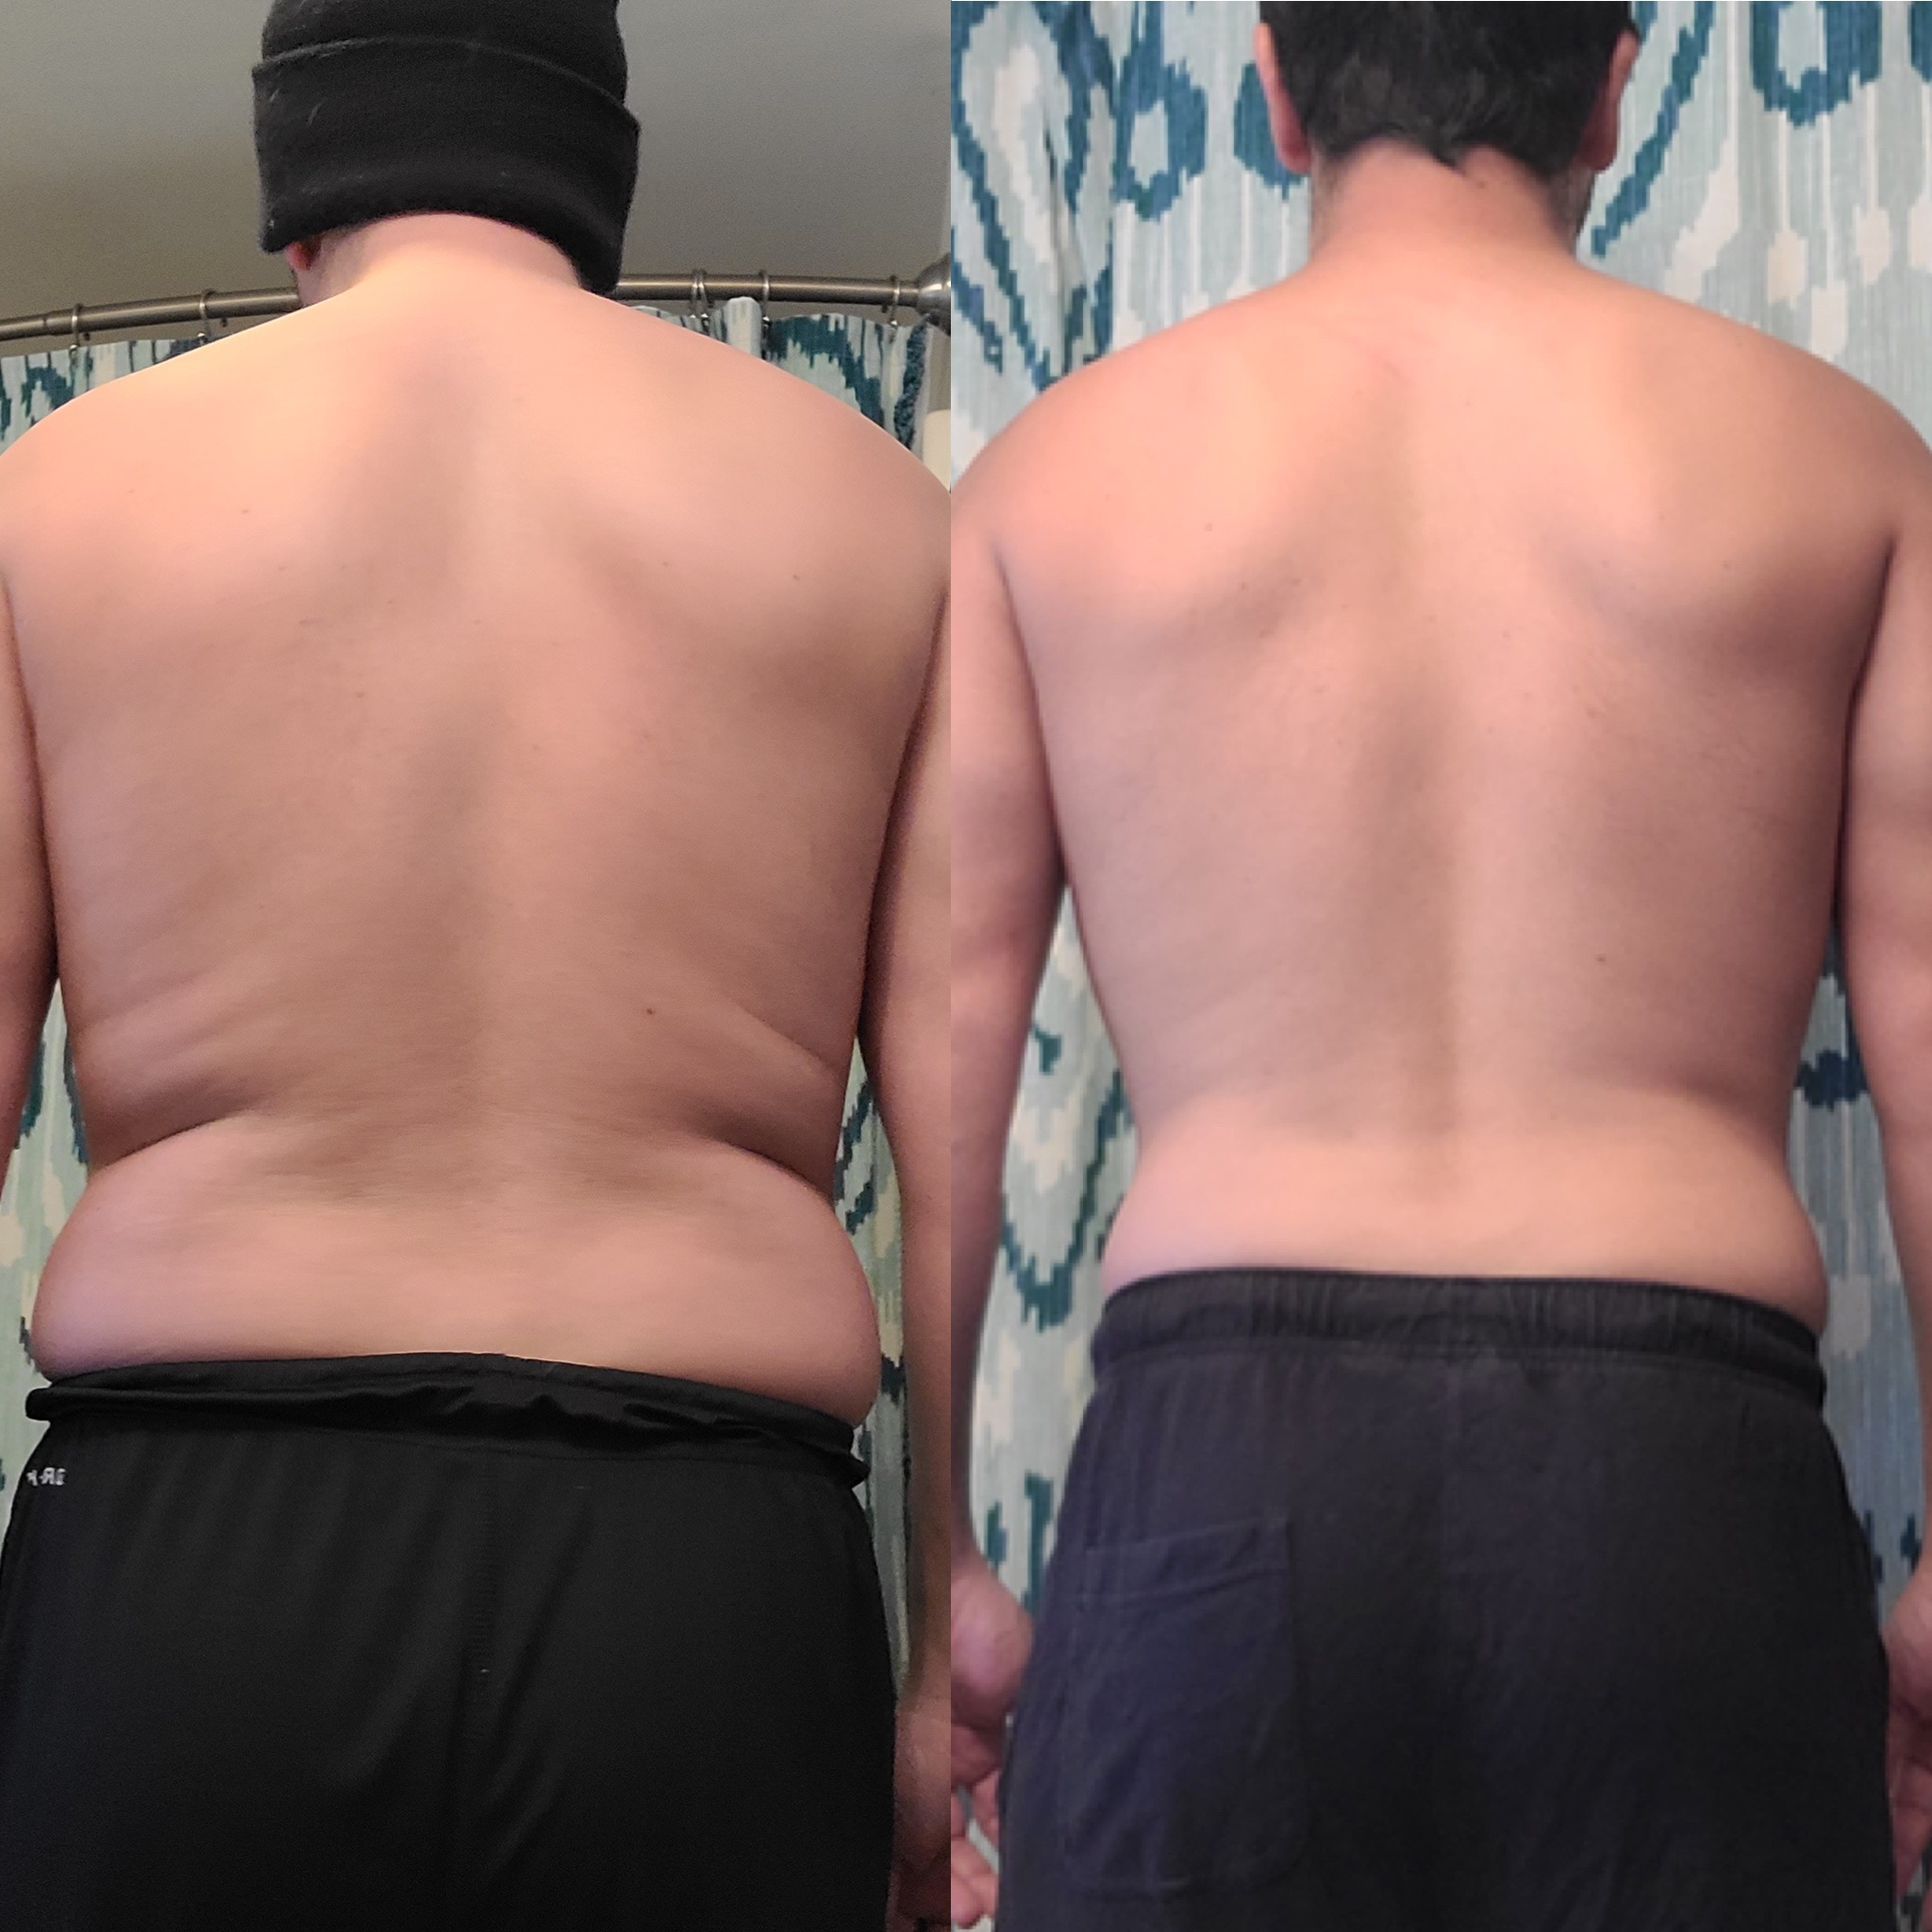 Two photos from the rear comparing Pierce's starting body composition to his final body composition.